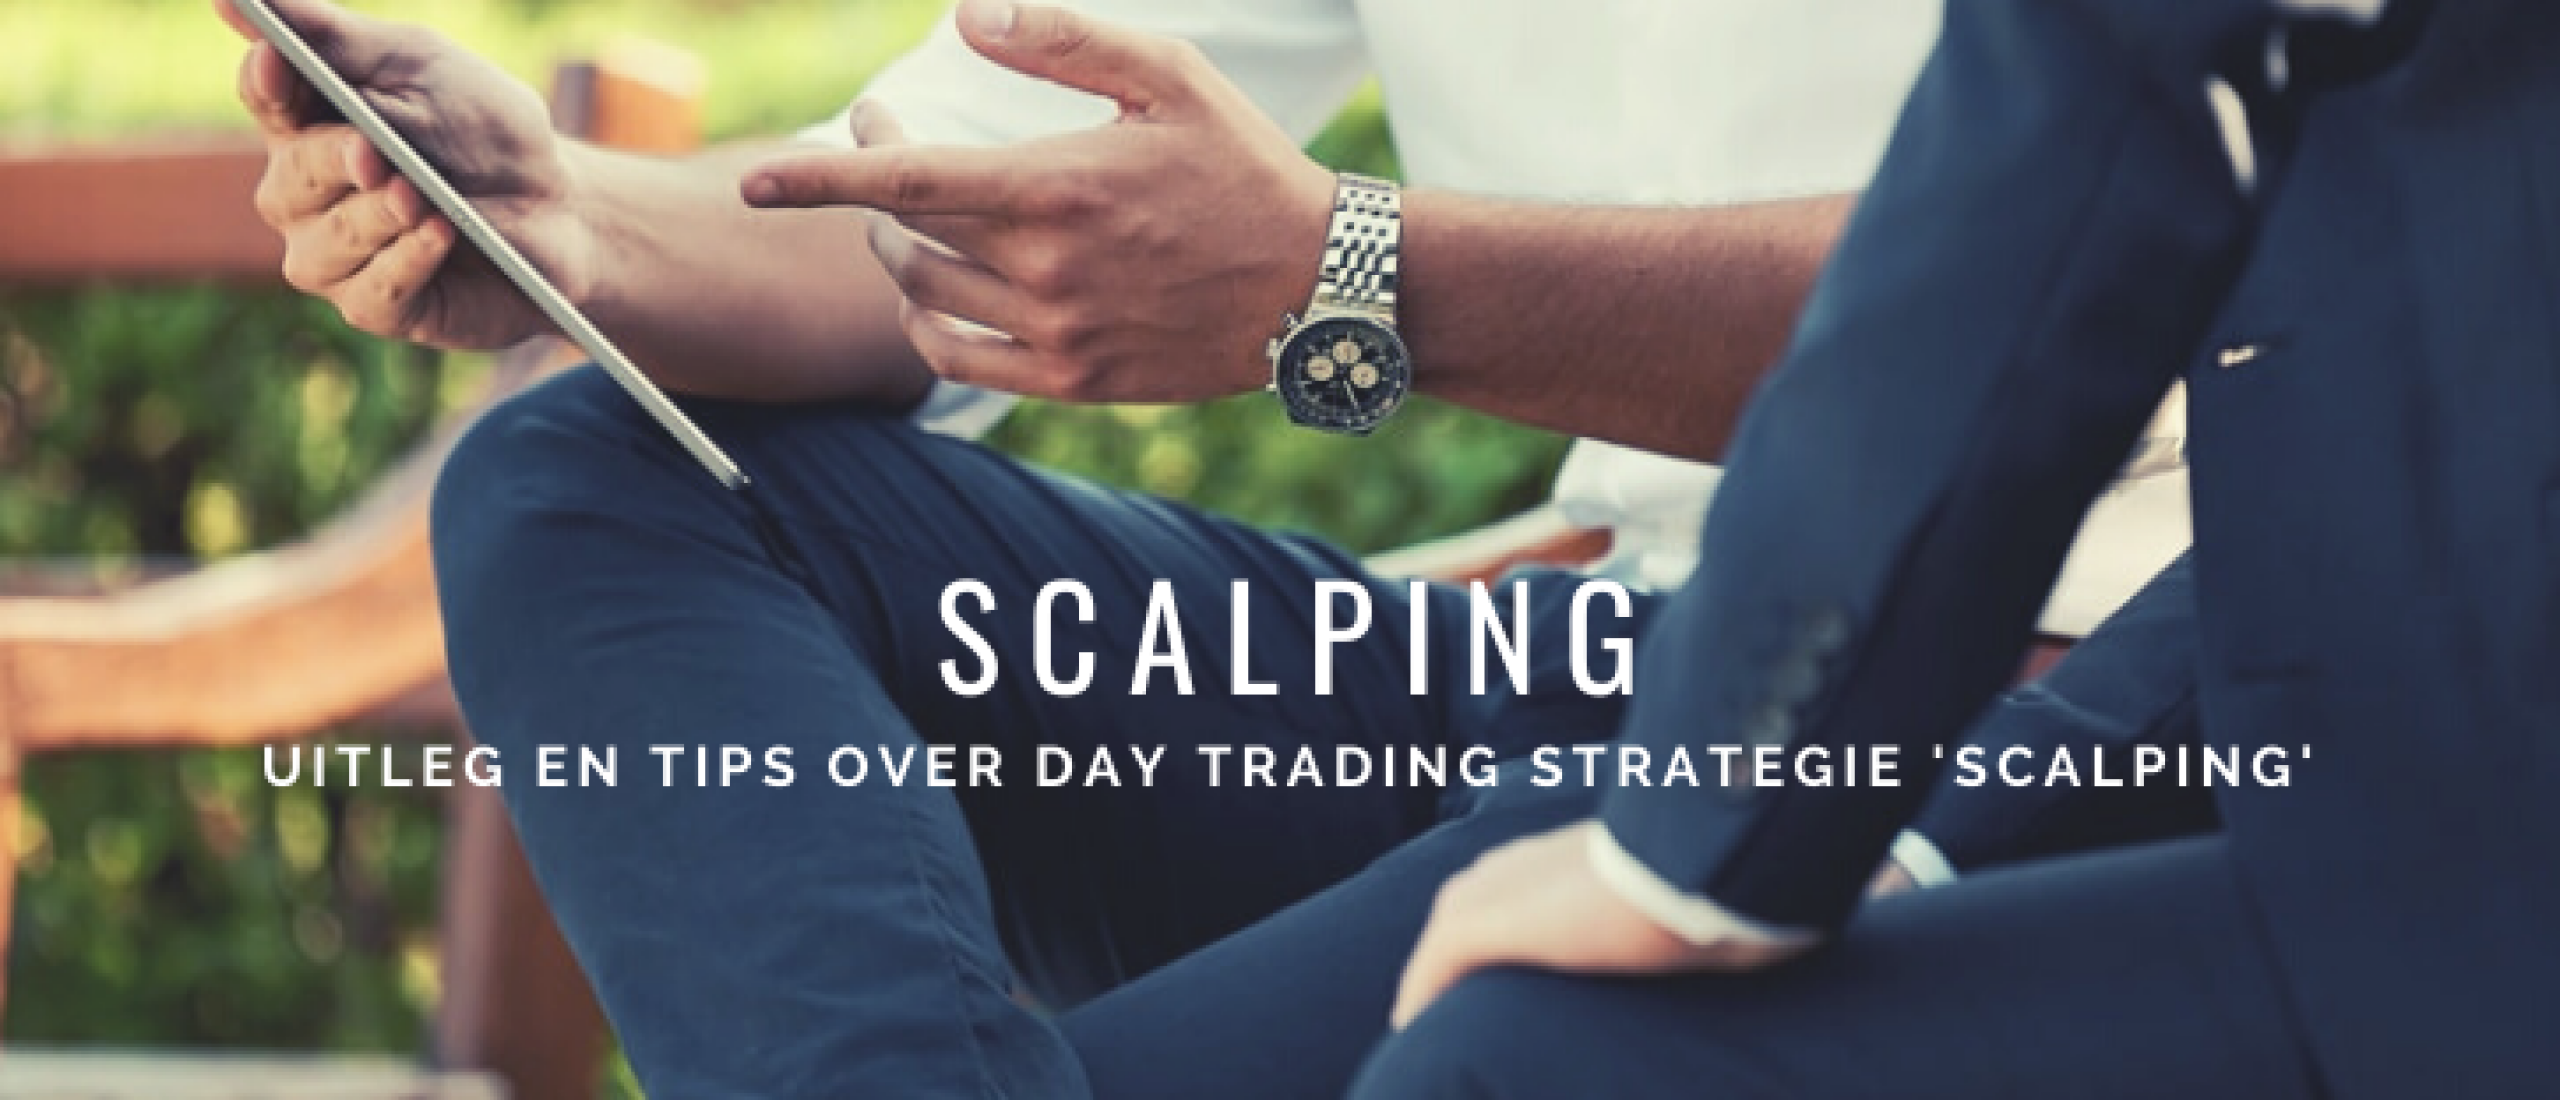 day-trading-strategie-scalping